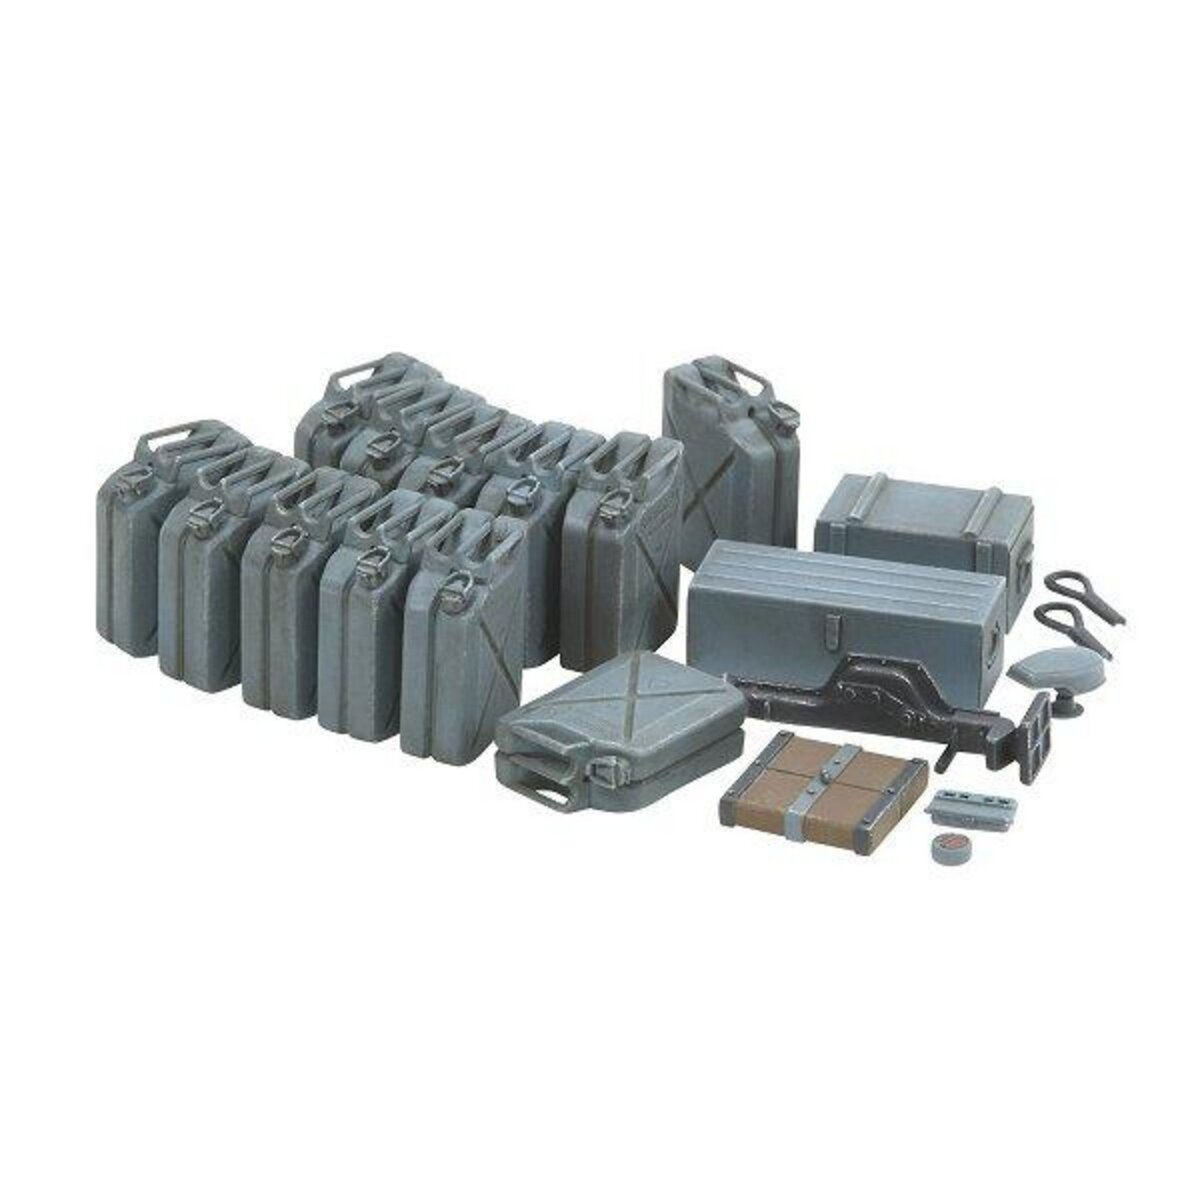 Tamiya Accessoires militaires : Jerrycans allemands